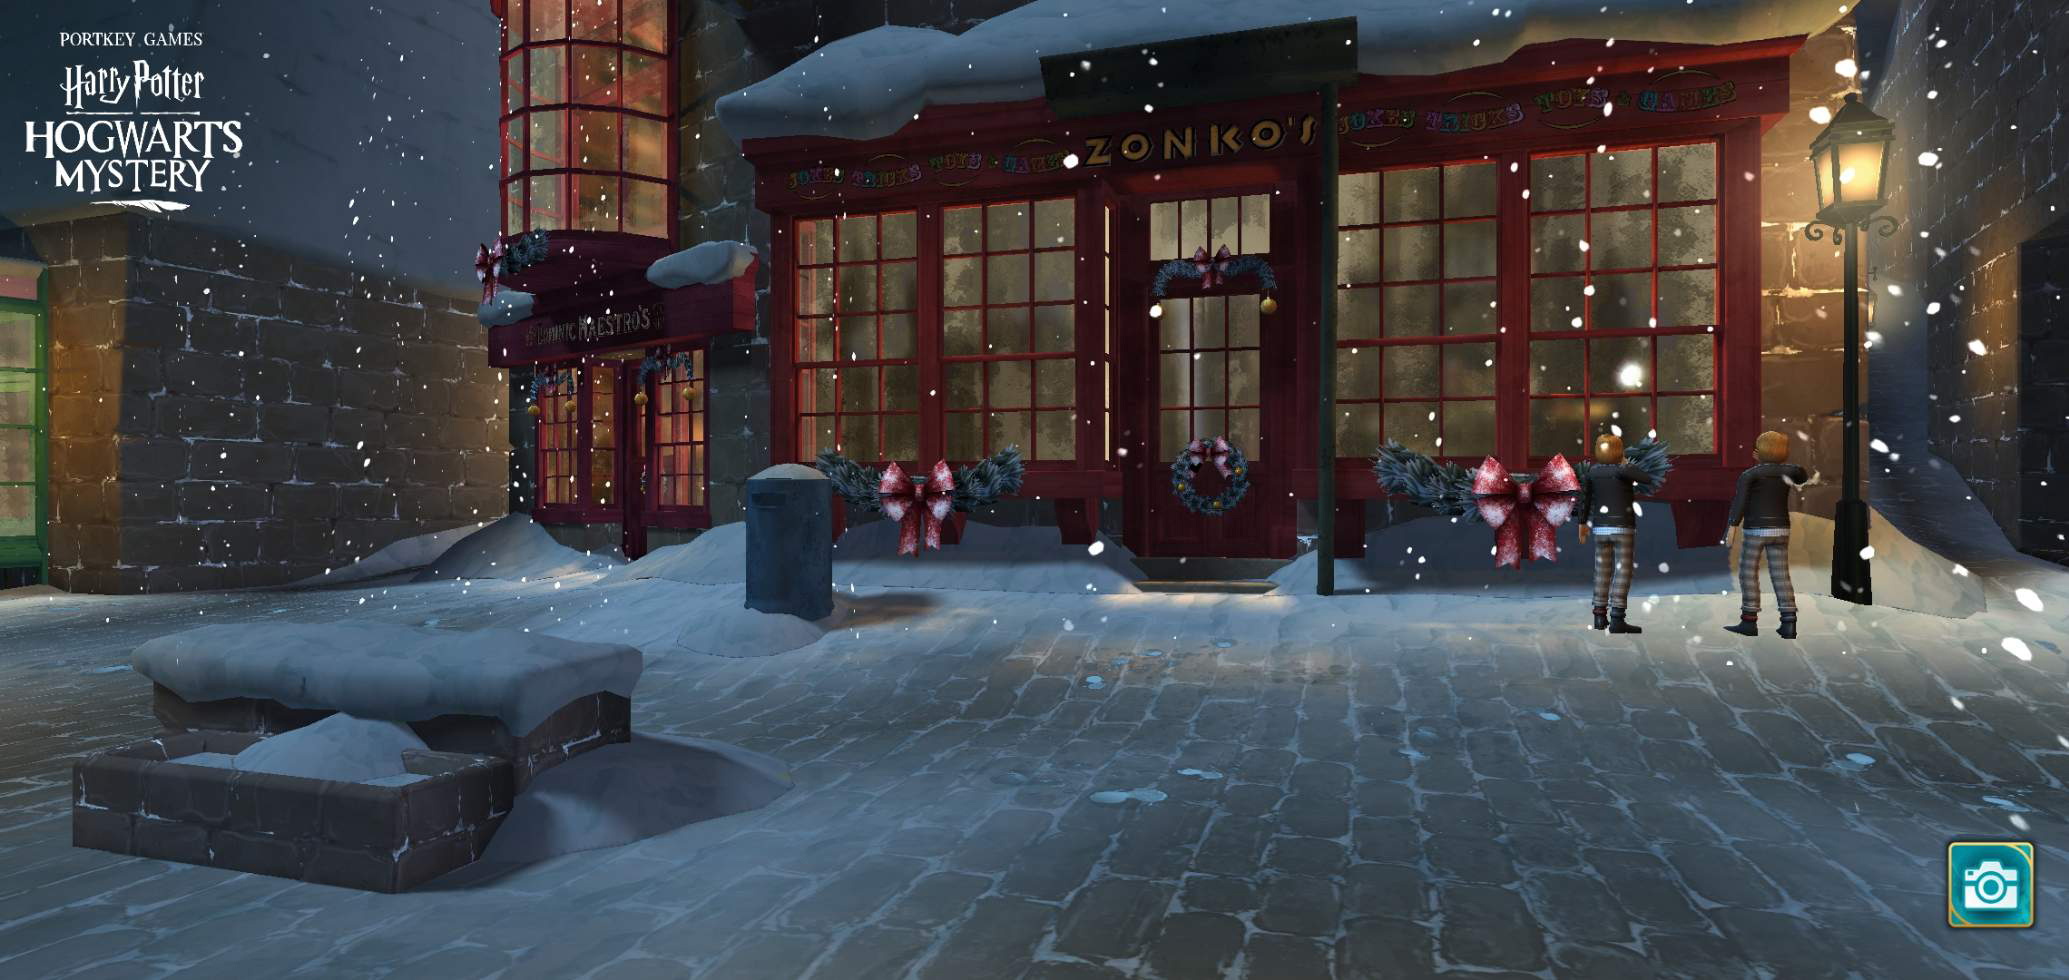 Hogsmeade is now seen by night with glowing windows and holiday decorations.